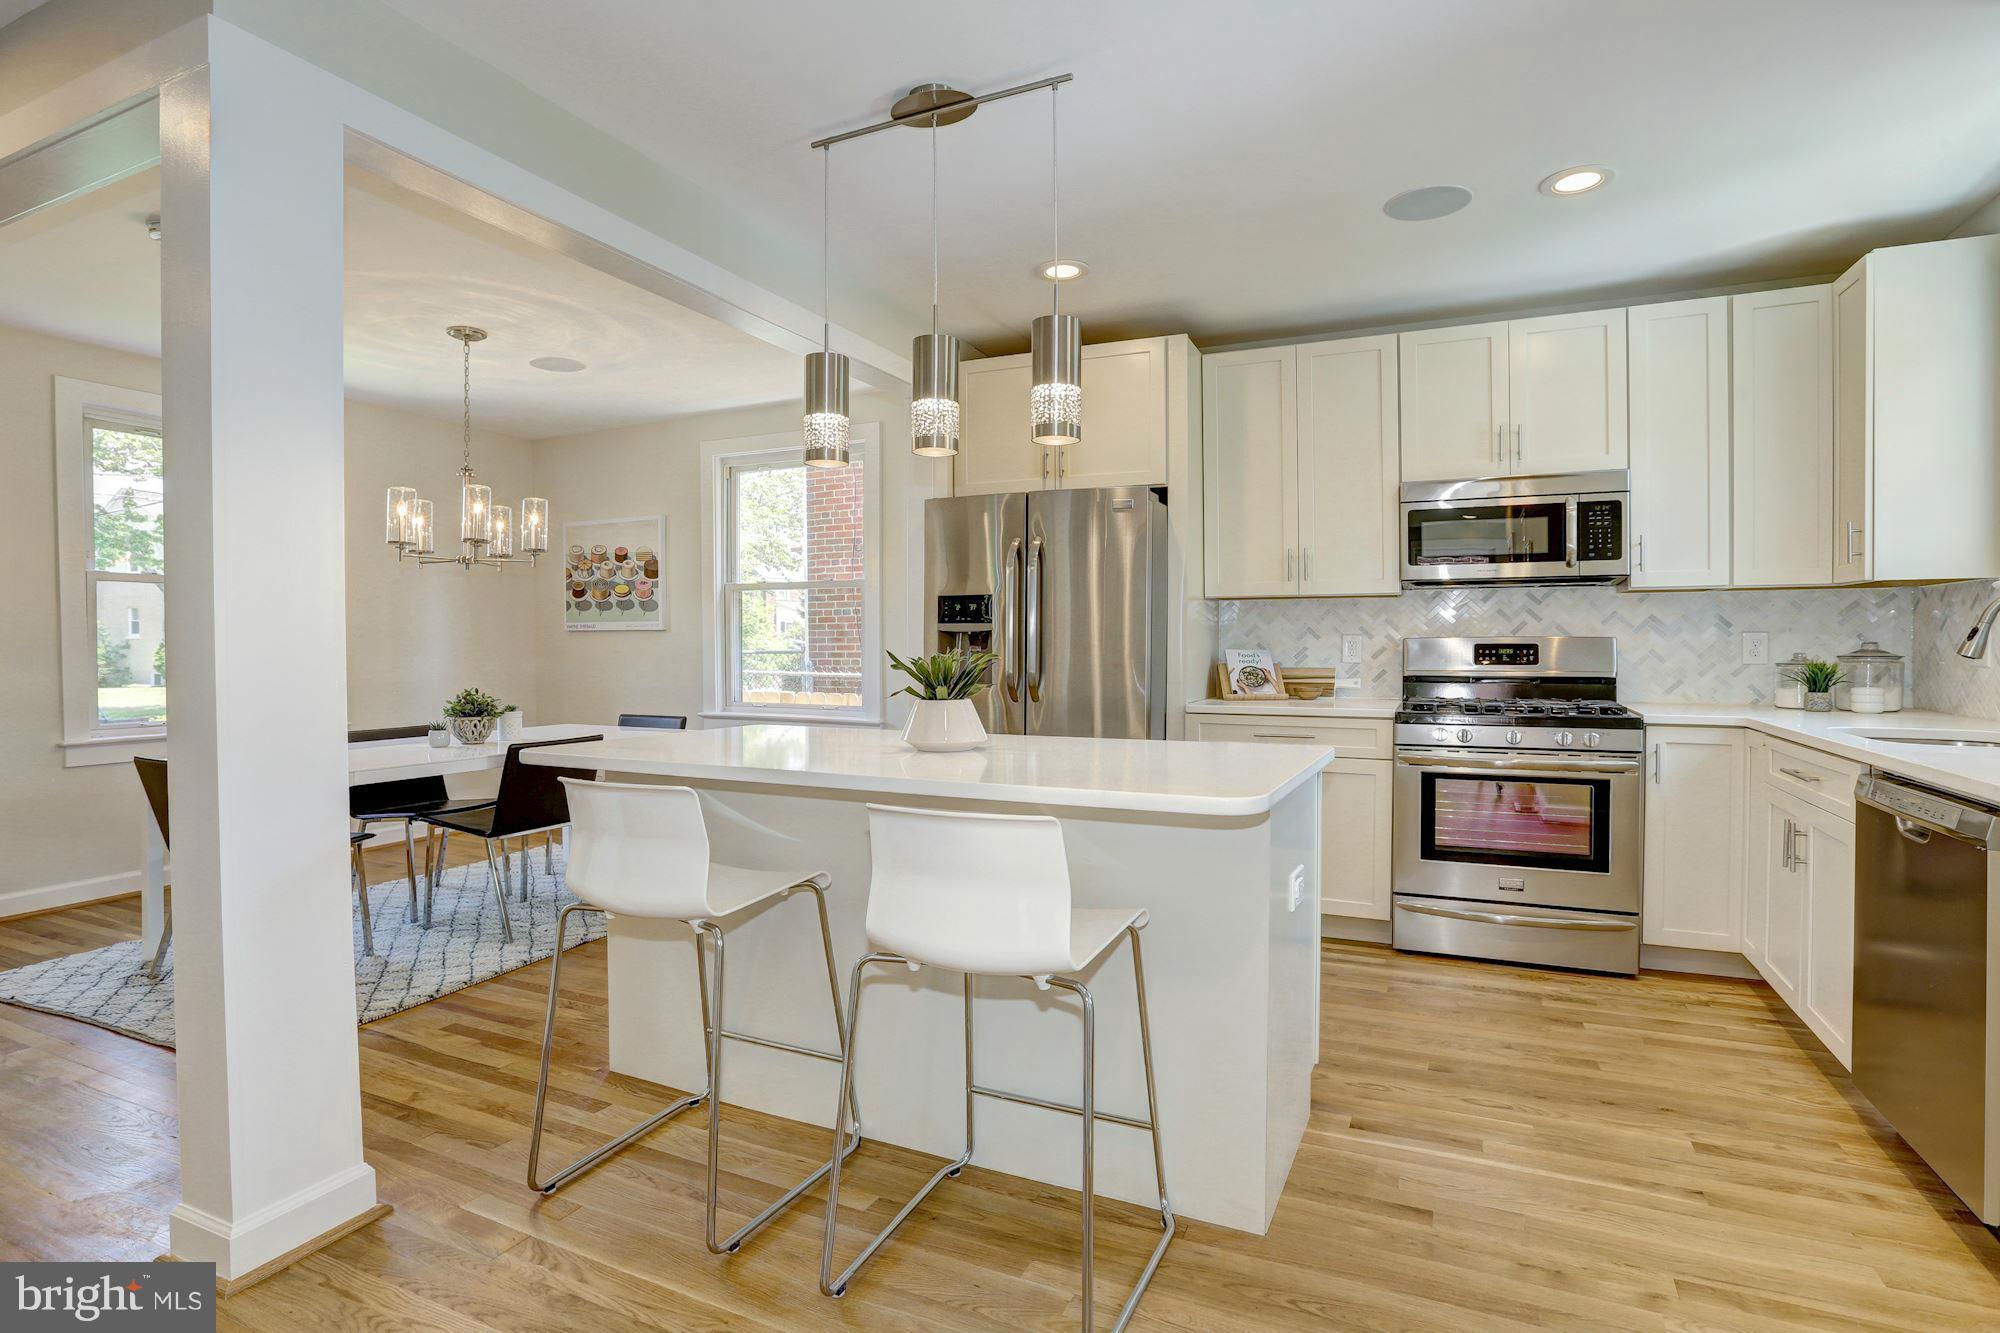 a kitchen with stainless steel appliances a stove a sink dishwasher a refrigerator and white cabinets with wooden floor